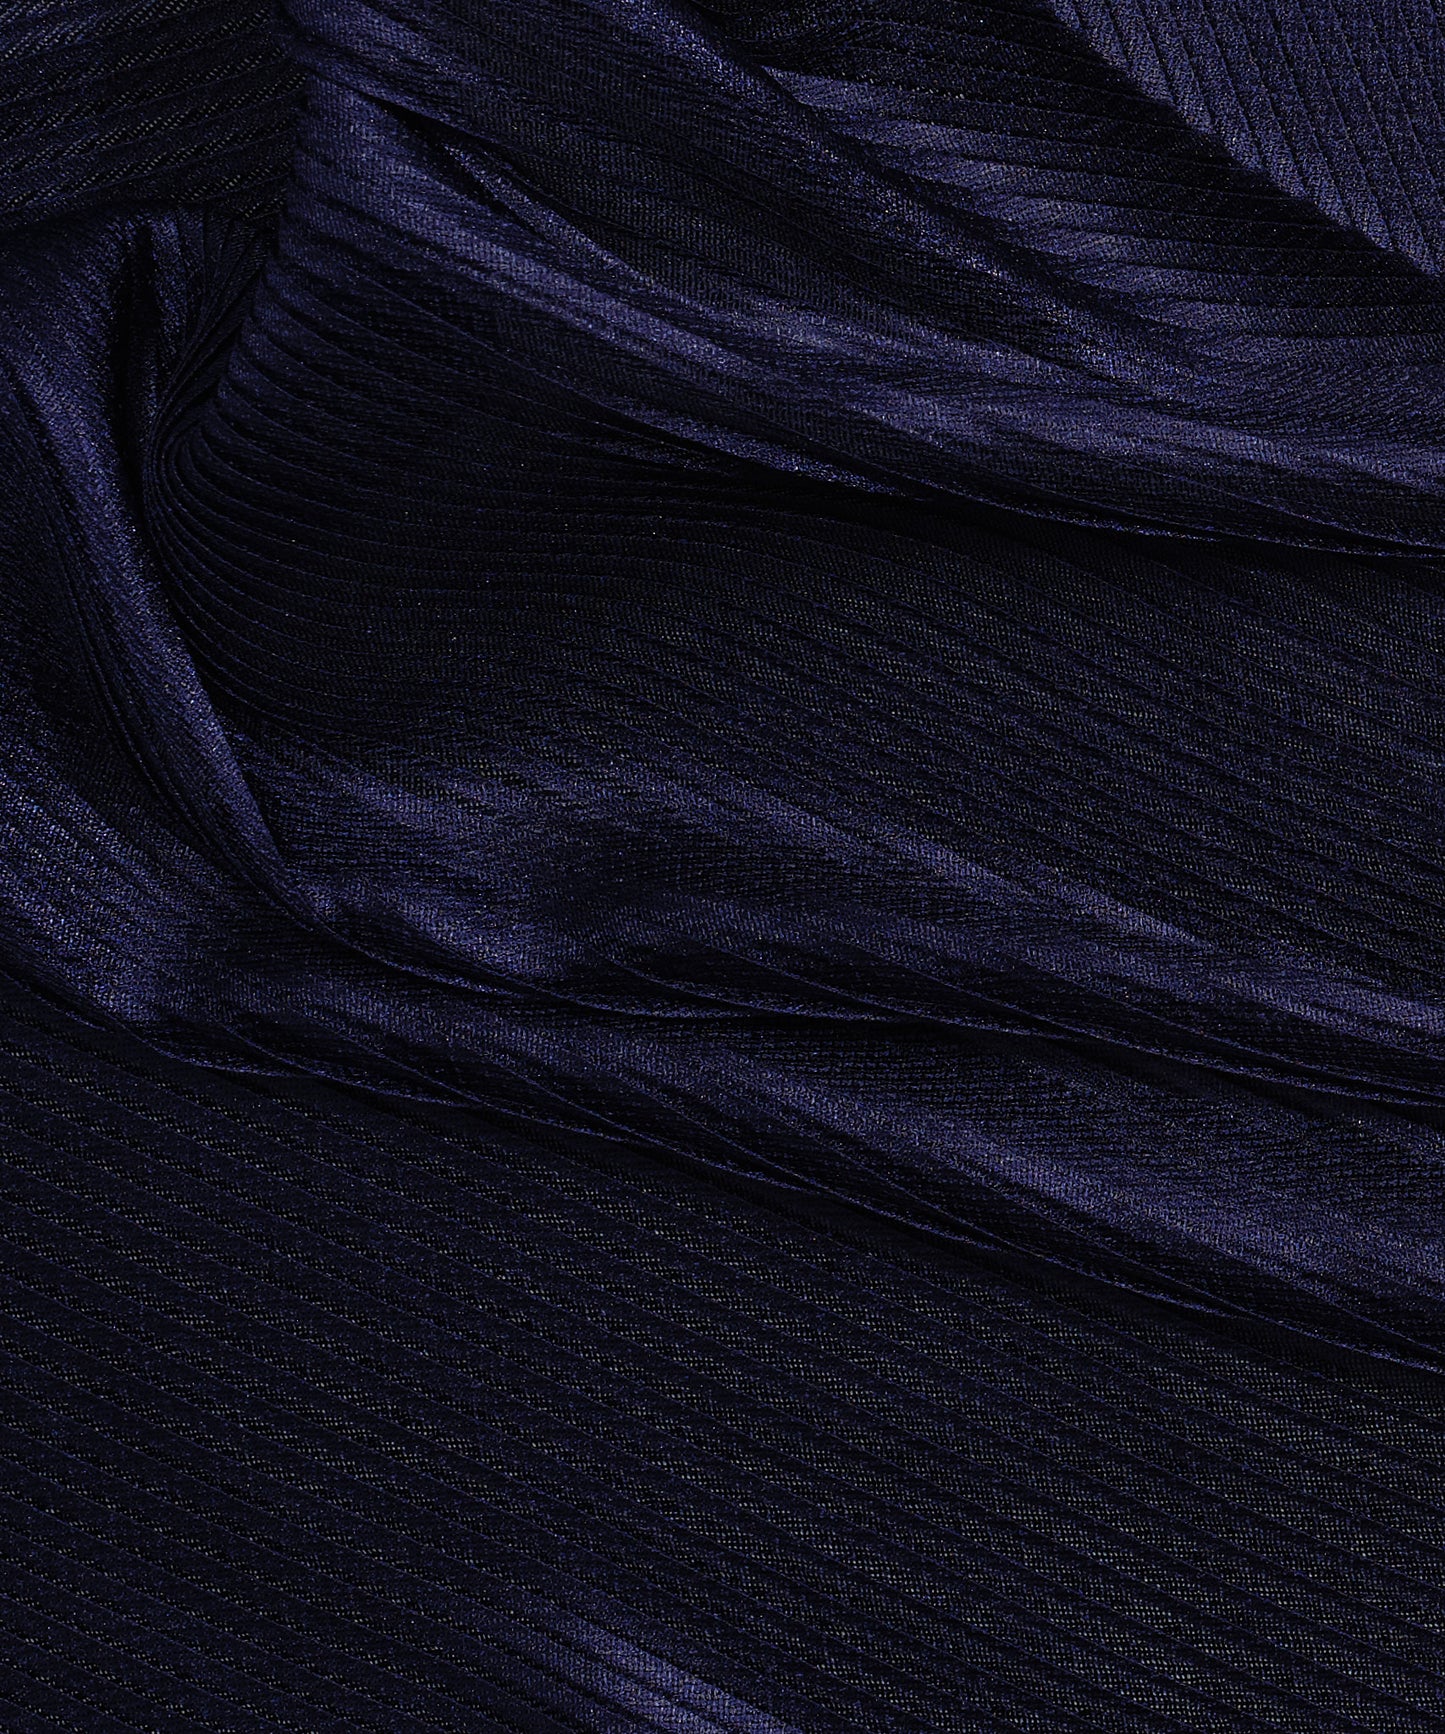 Pleated Radiance Wrap in color Navy